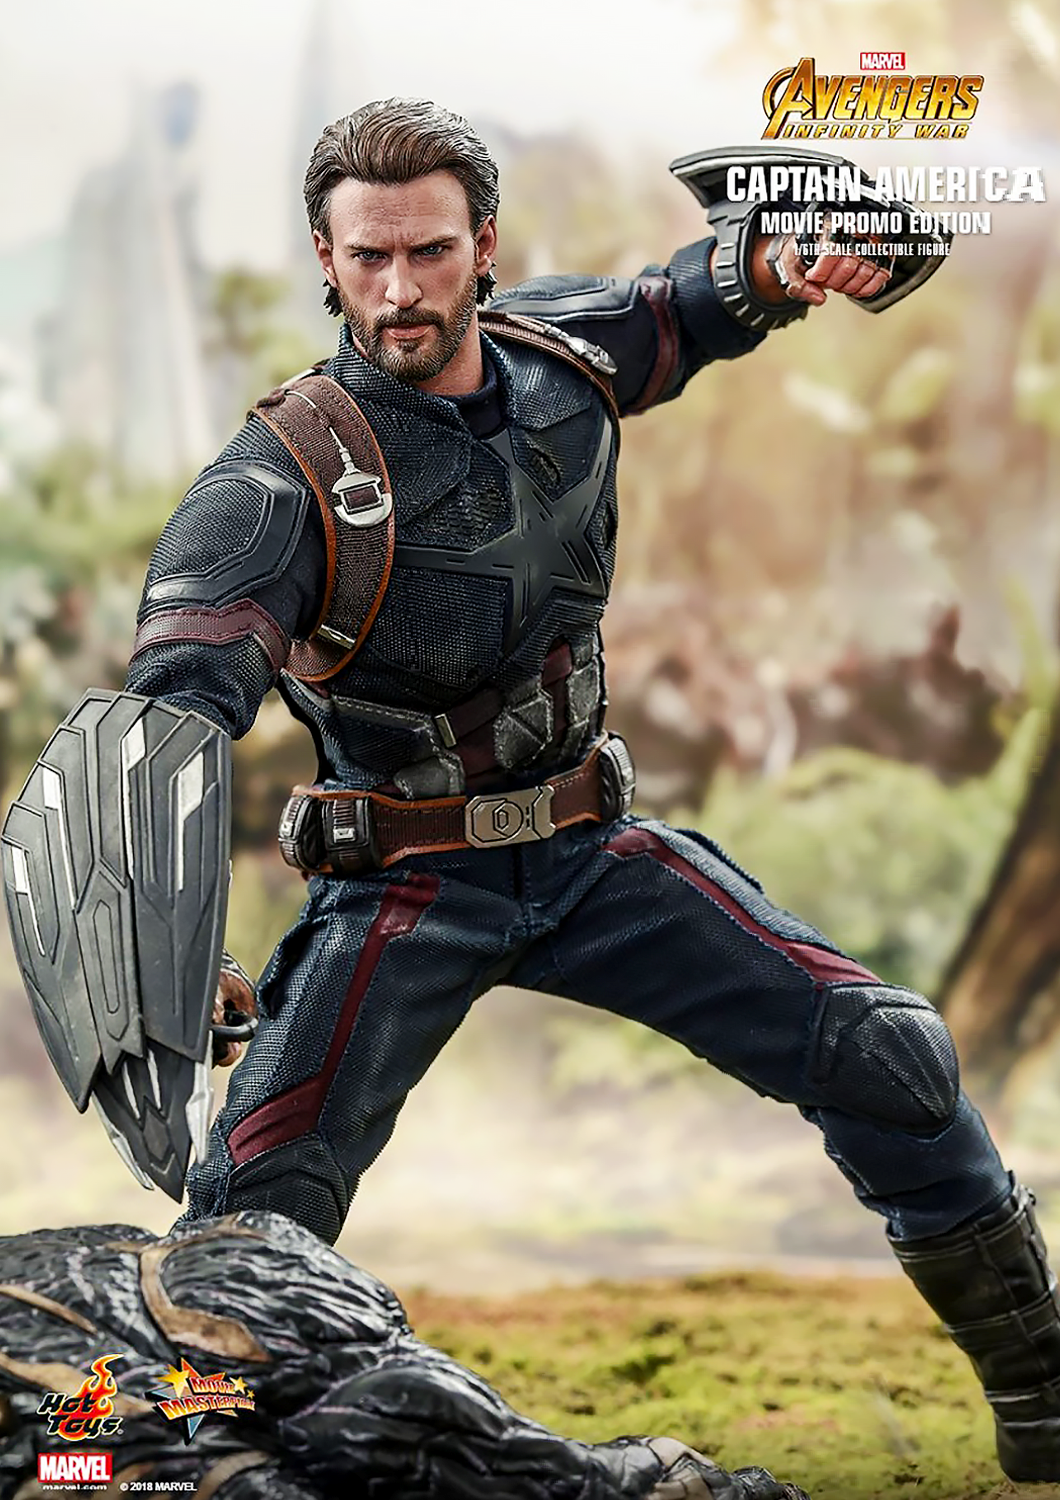 HOT TOYS MARVEL  AVENGERS INFINITY WAR CAPTAIN AMERICA MOVIE PROMO EDITION 1/6 SCALE - MMS481 - Anotoys Collectibles